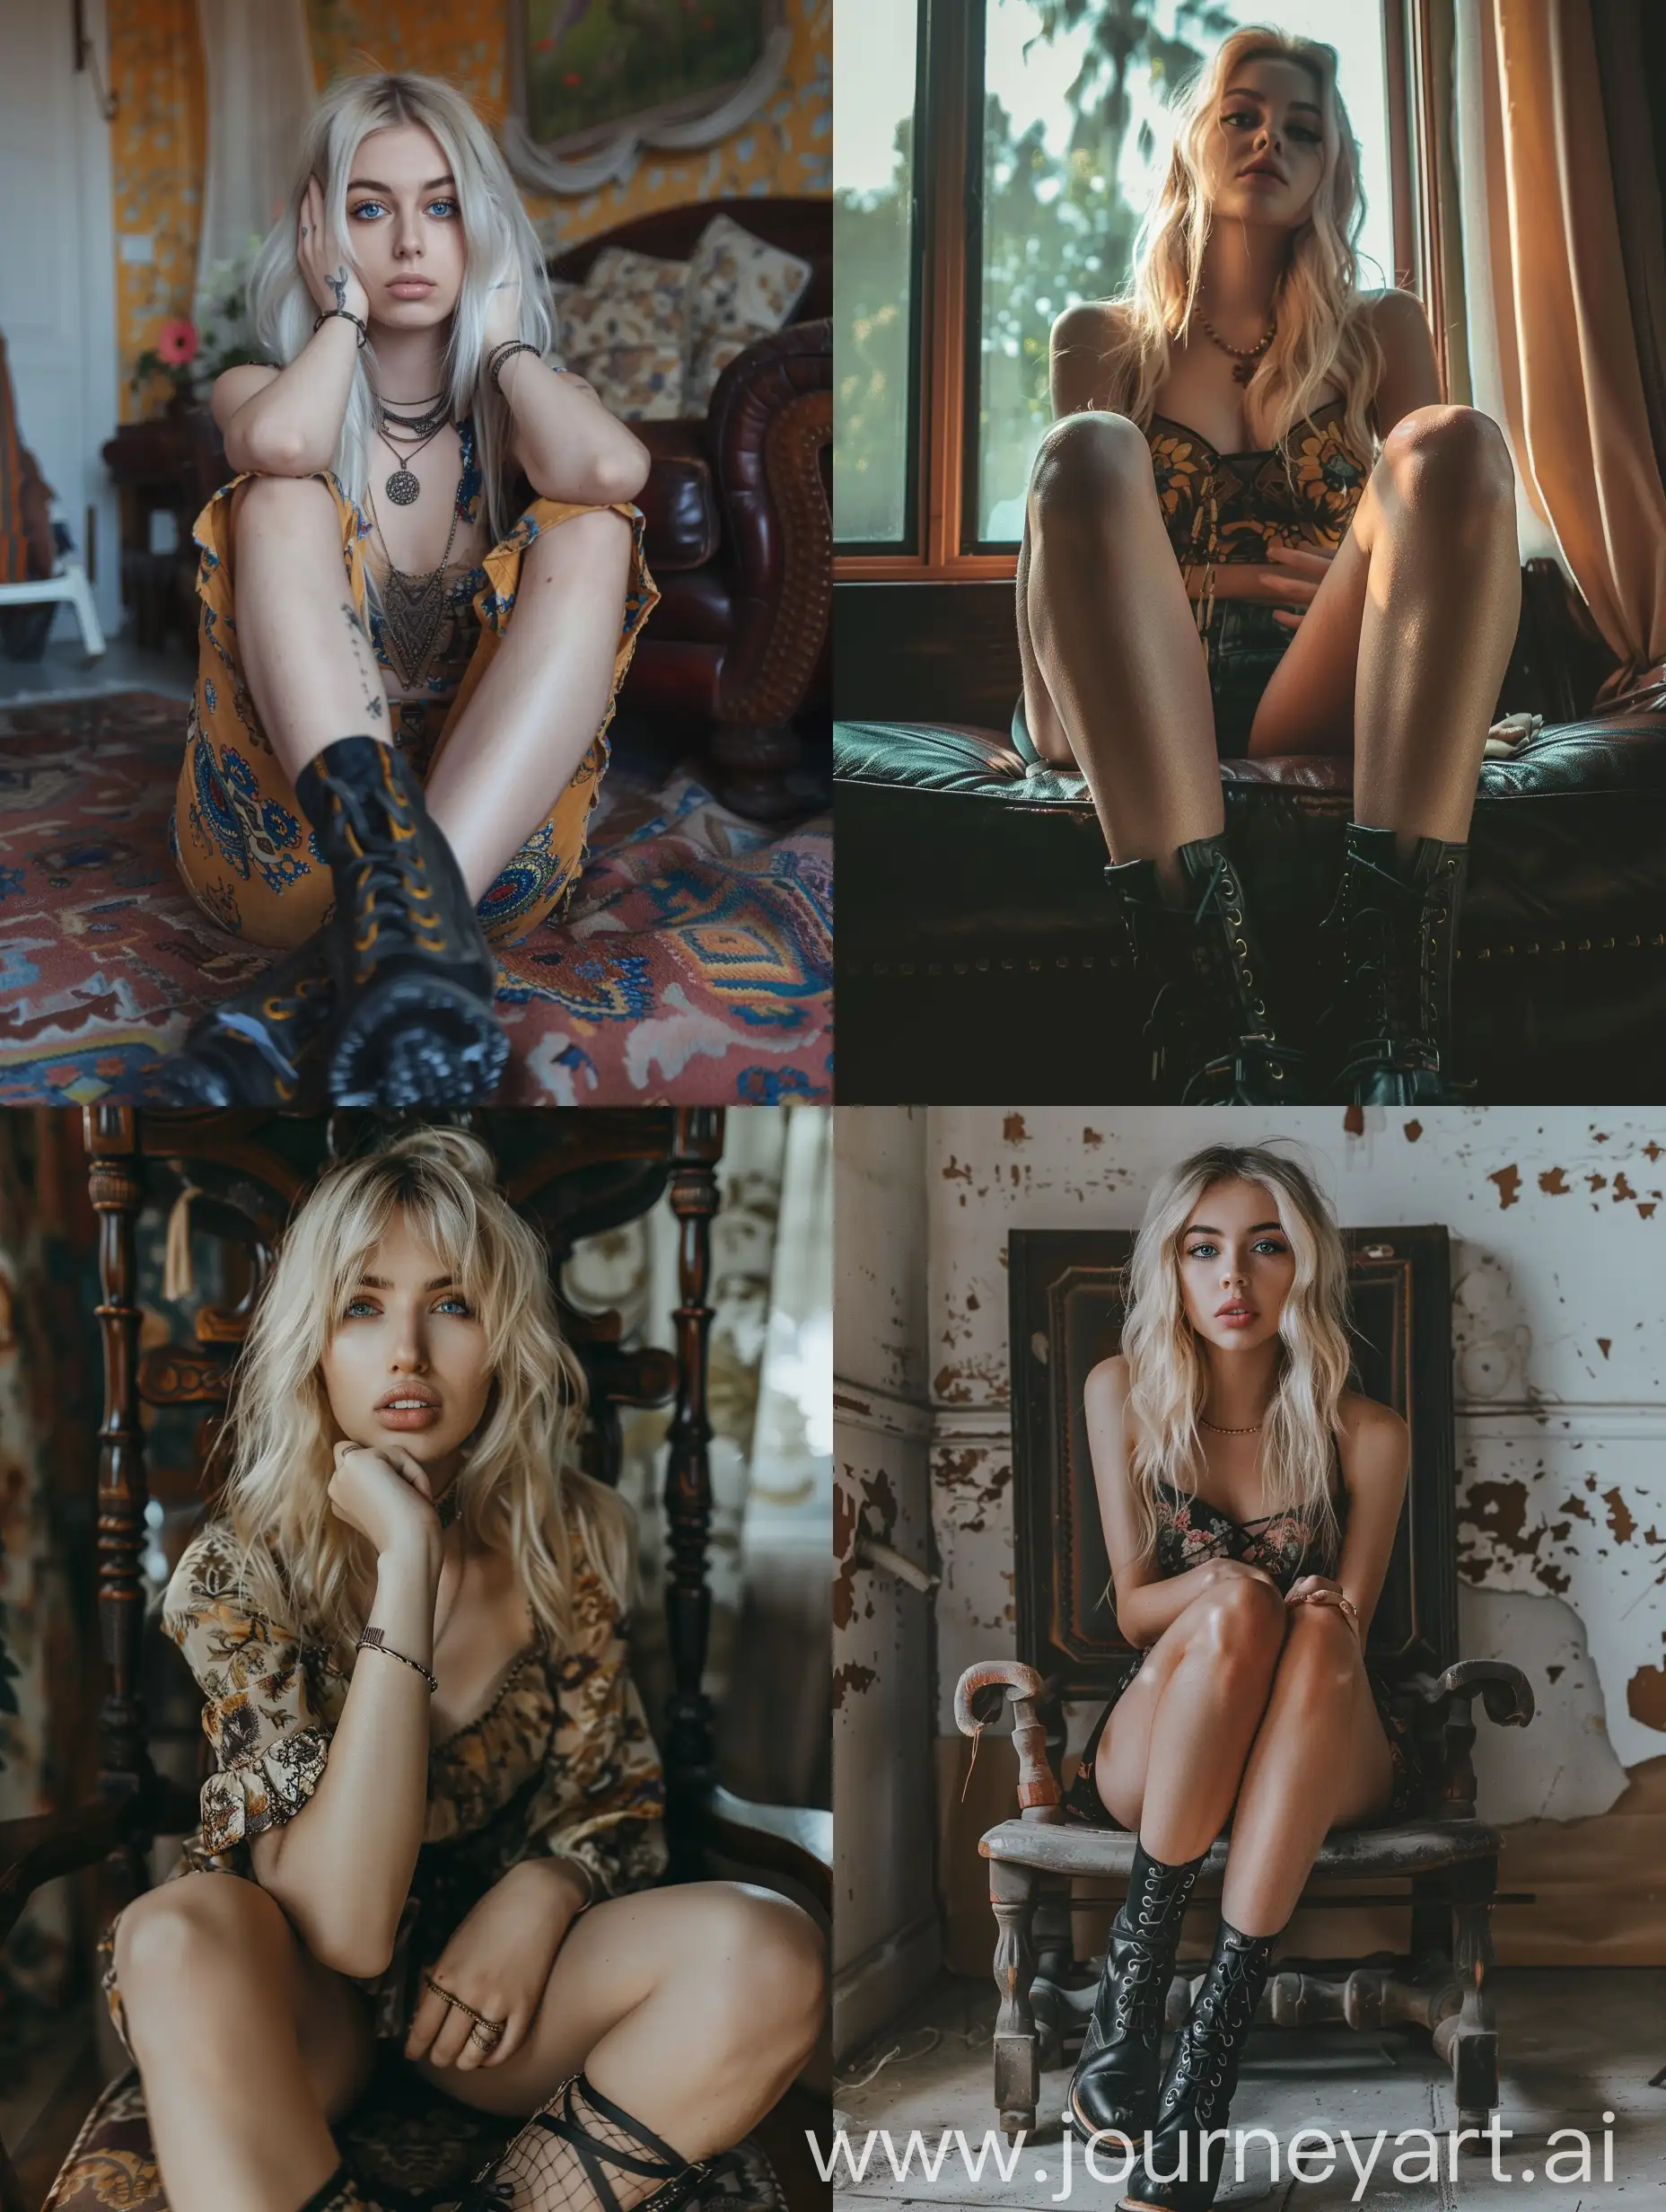 a blonde young woman, 20 years old, influencer, beauty, dressed like an indian,  Indian fantasy, makeup,, ,, black boots, ,sitting, ,fat legs, , socks and boots, 4k, sitting onchair, dental braces, blue eye,
, , close up, front view, no filters, no effects, natural, iphone photo